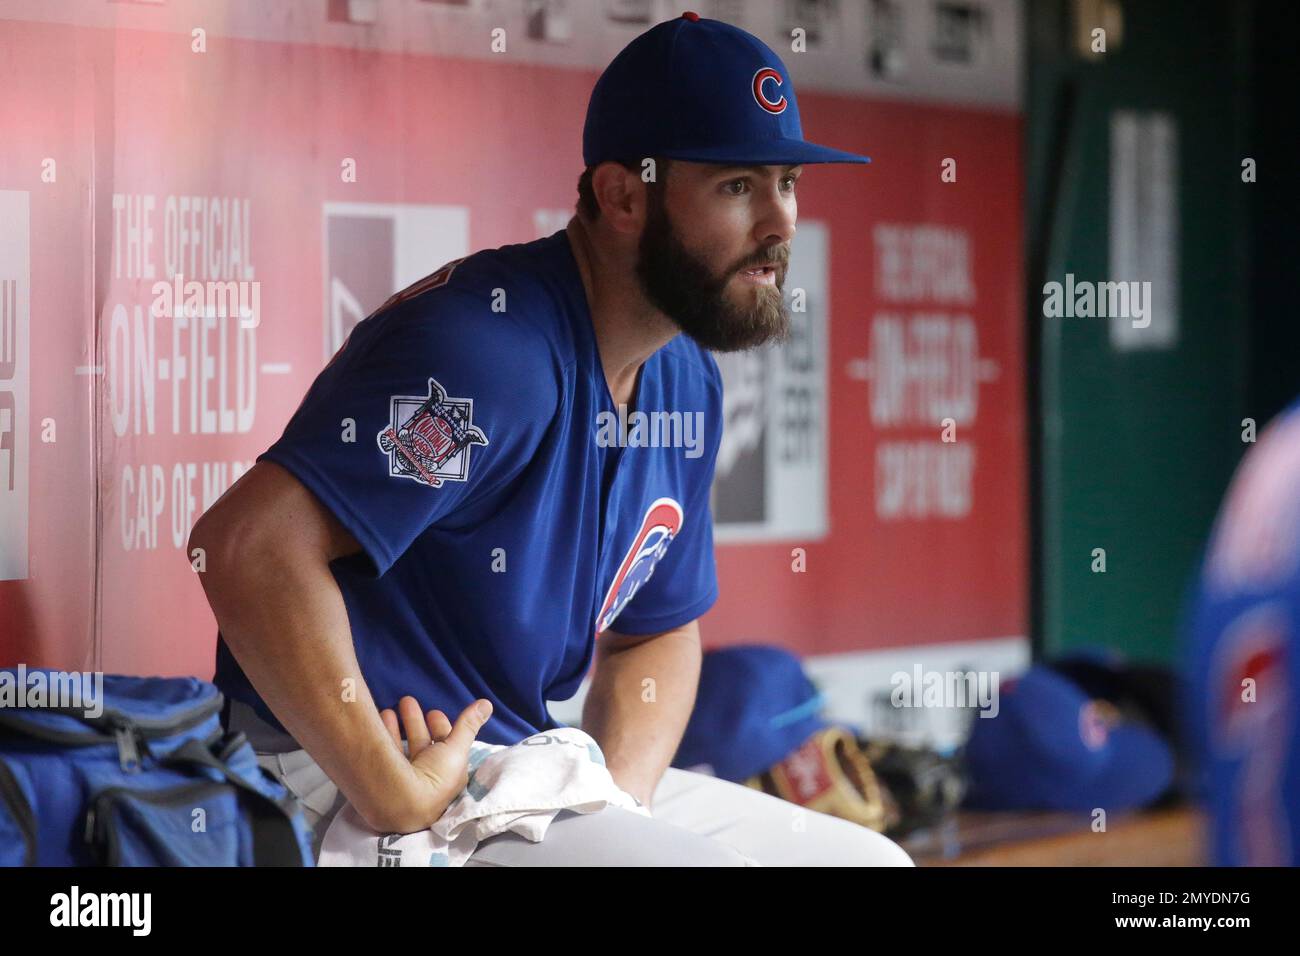 Former Cubs pitcher Jake Arrieta officially retires from baseball